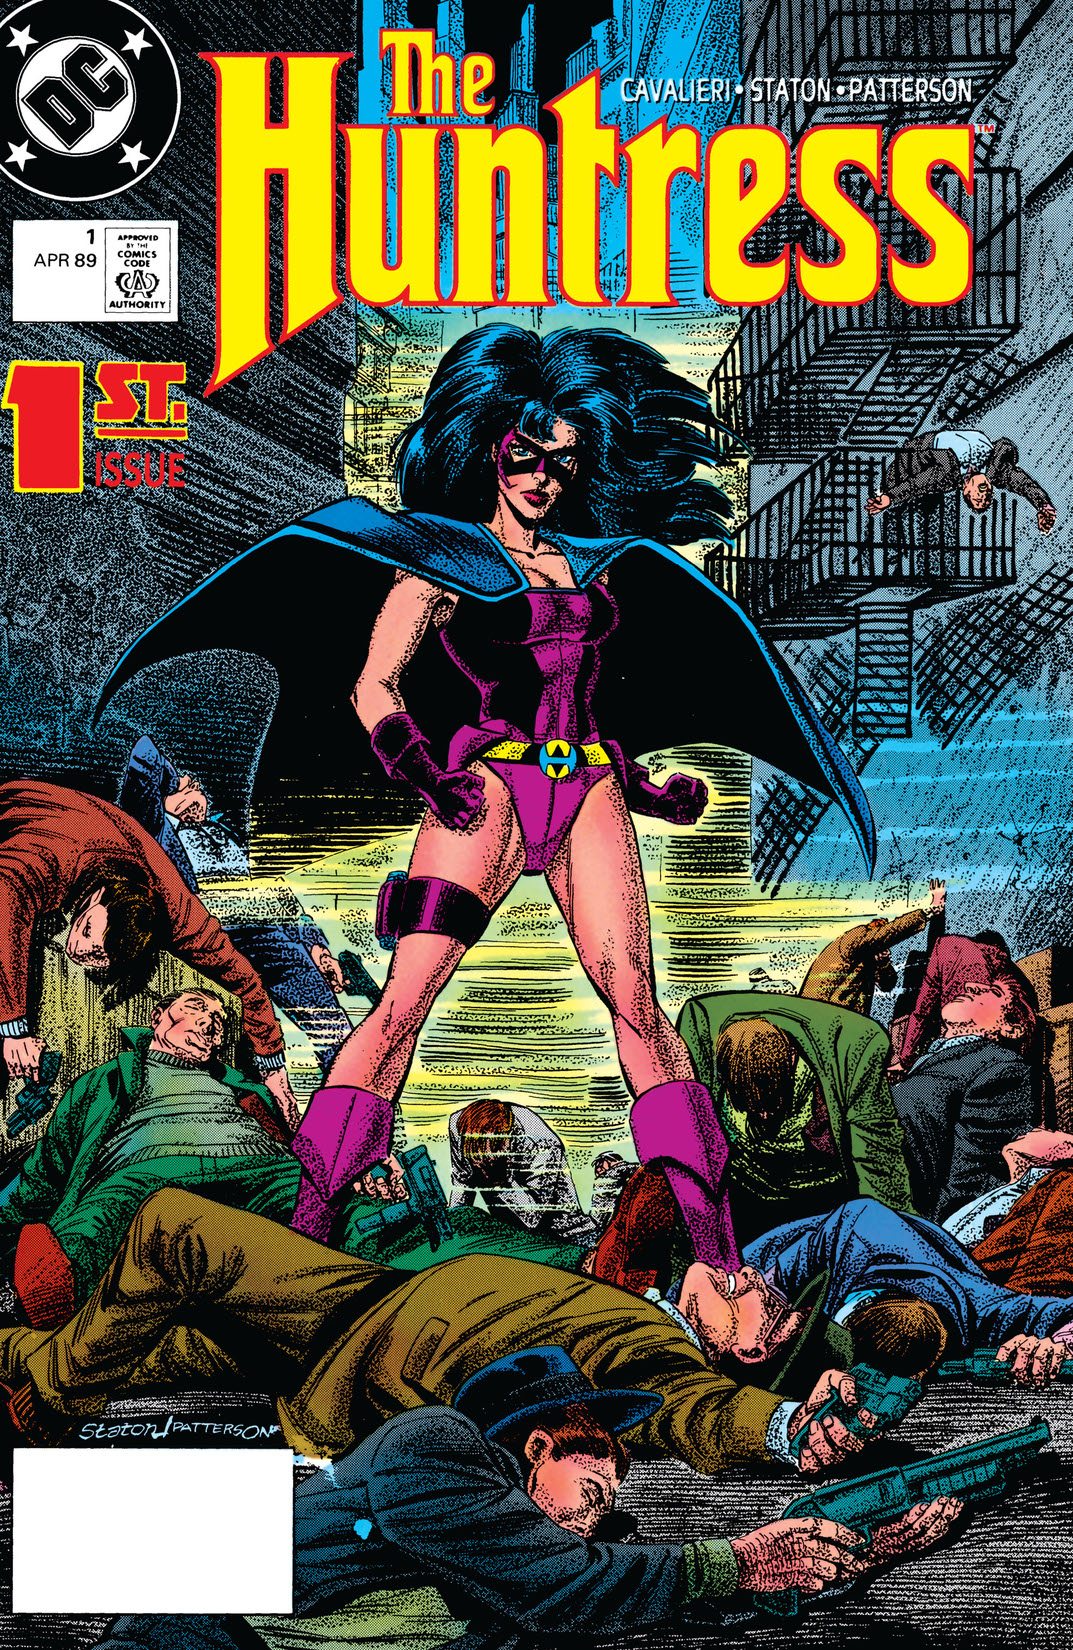 The Huntress (1989-) #1 preview images